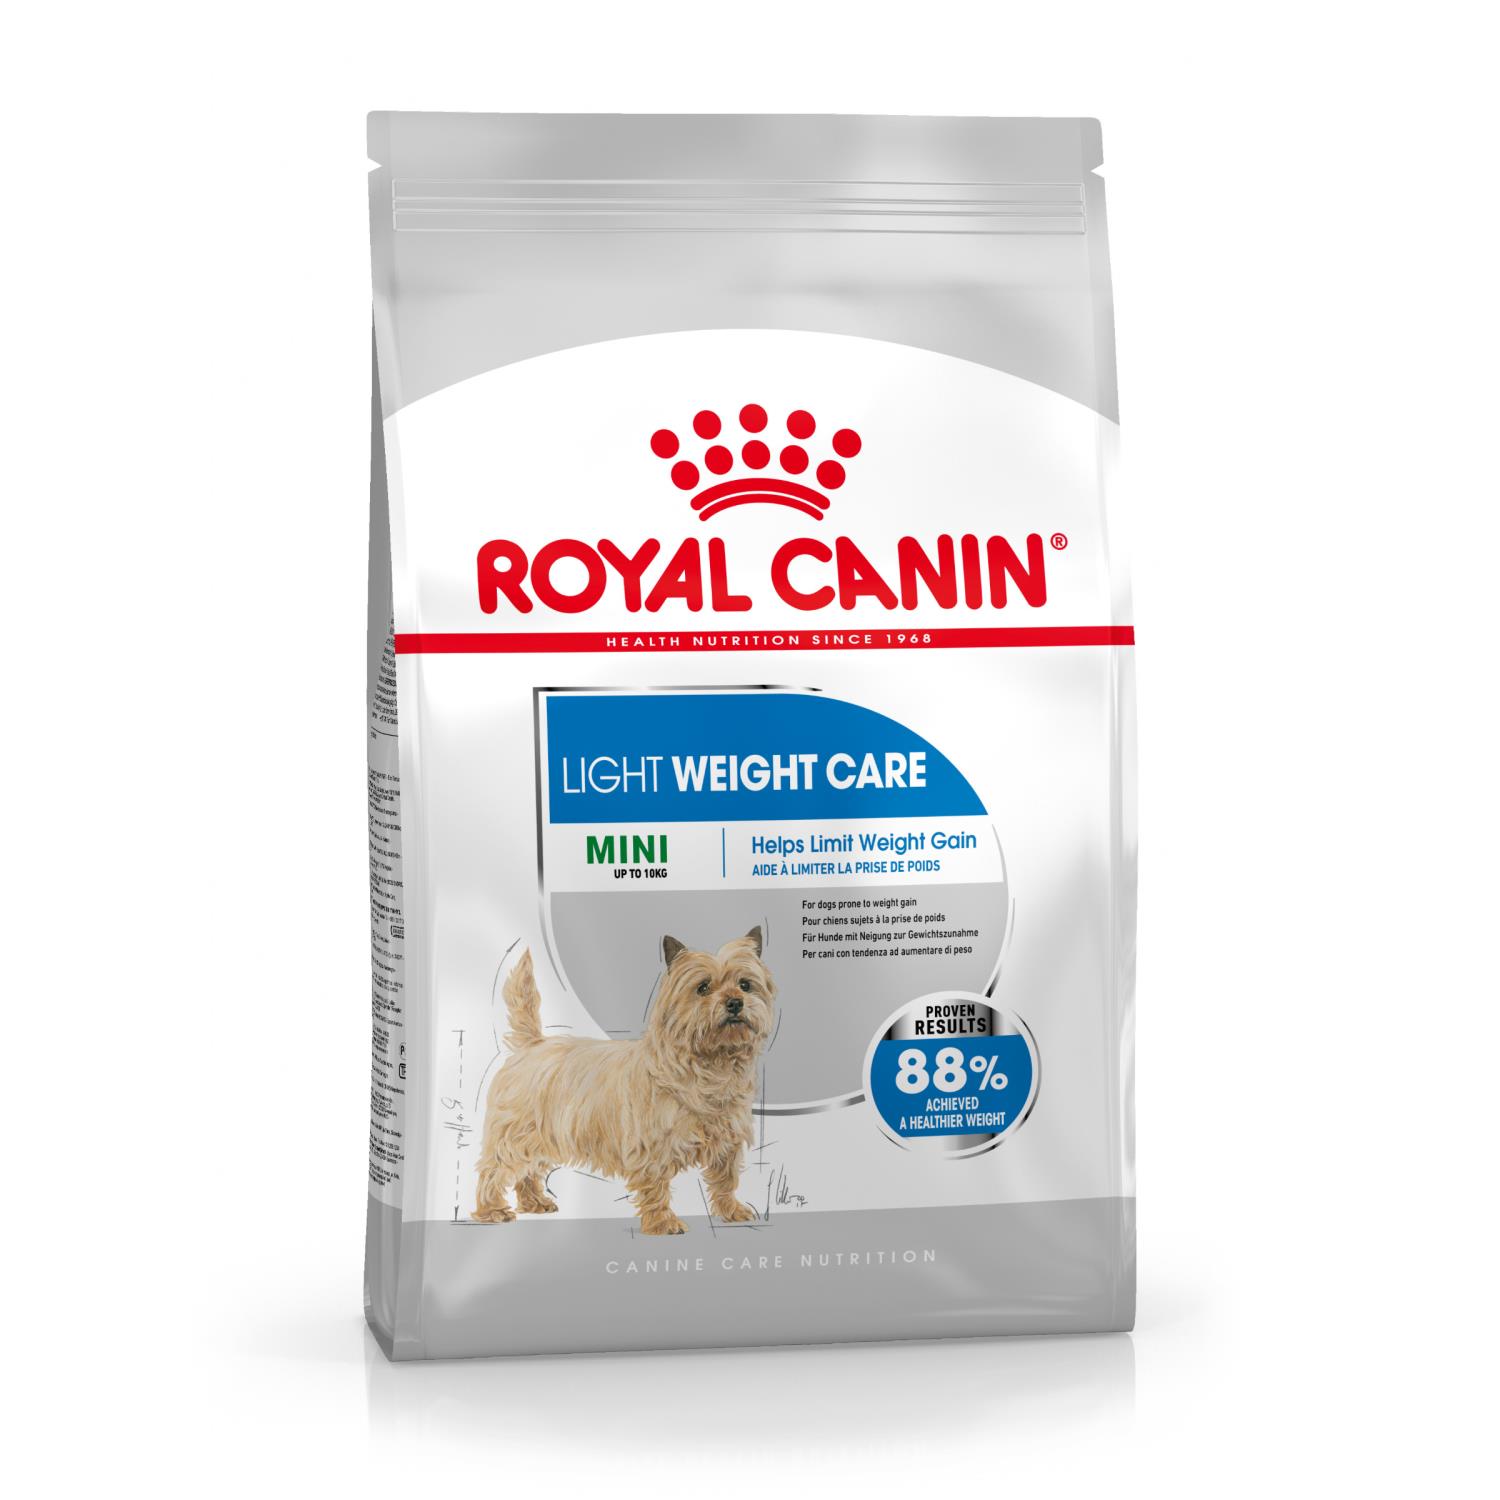 Royal Canin Mini light weight care 3kg